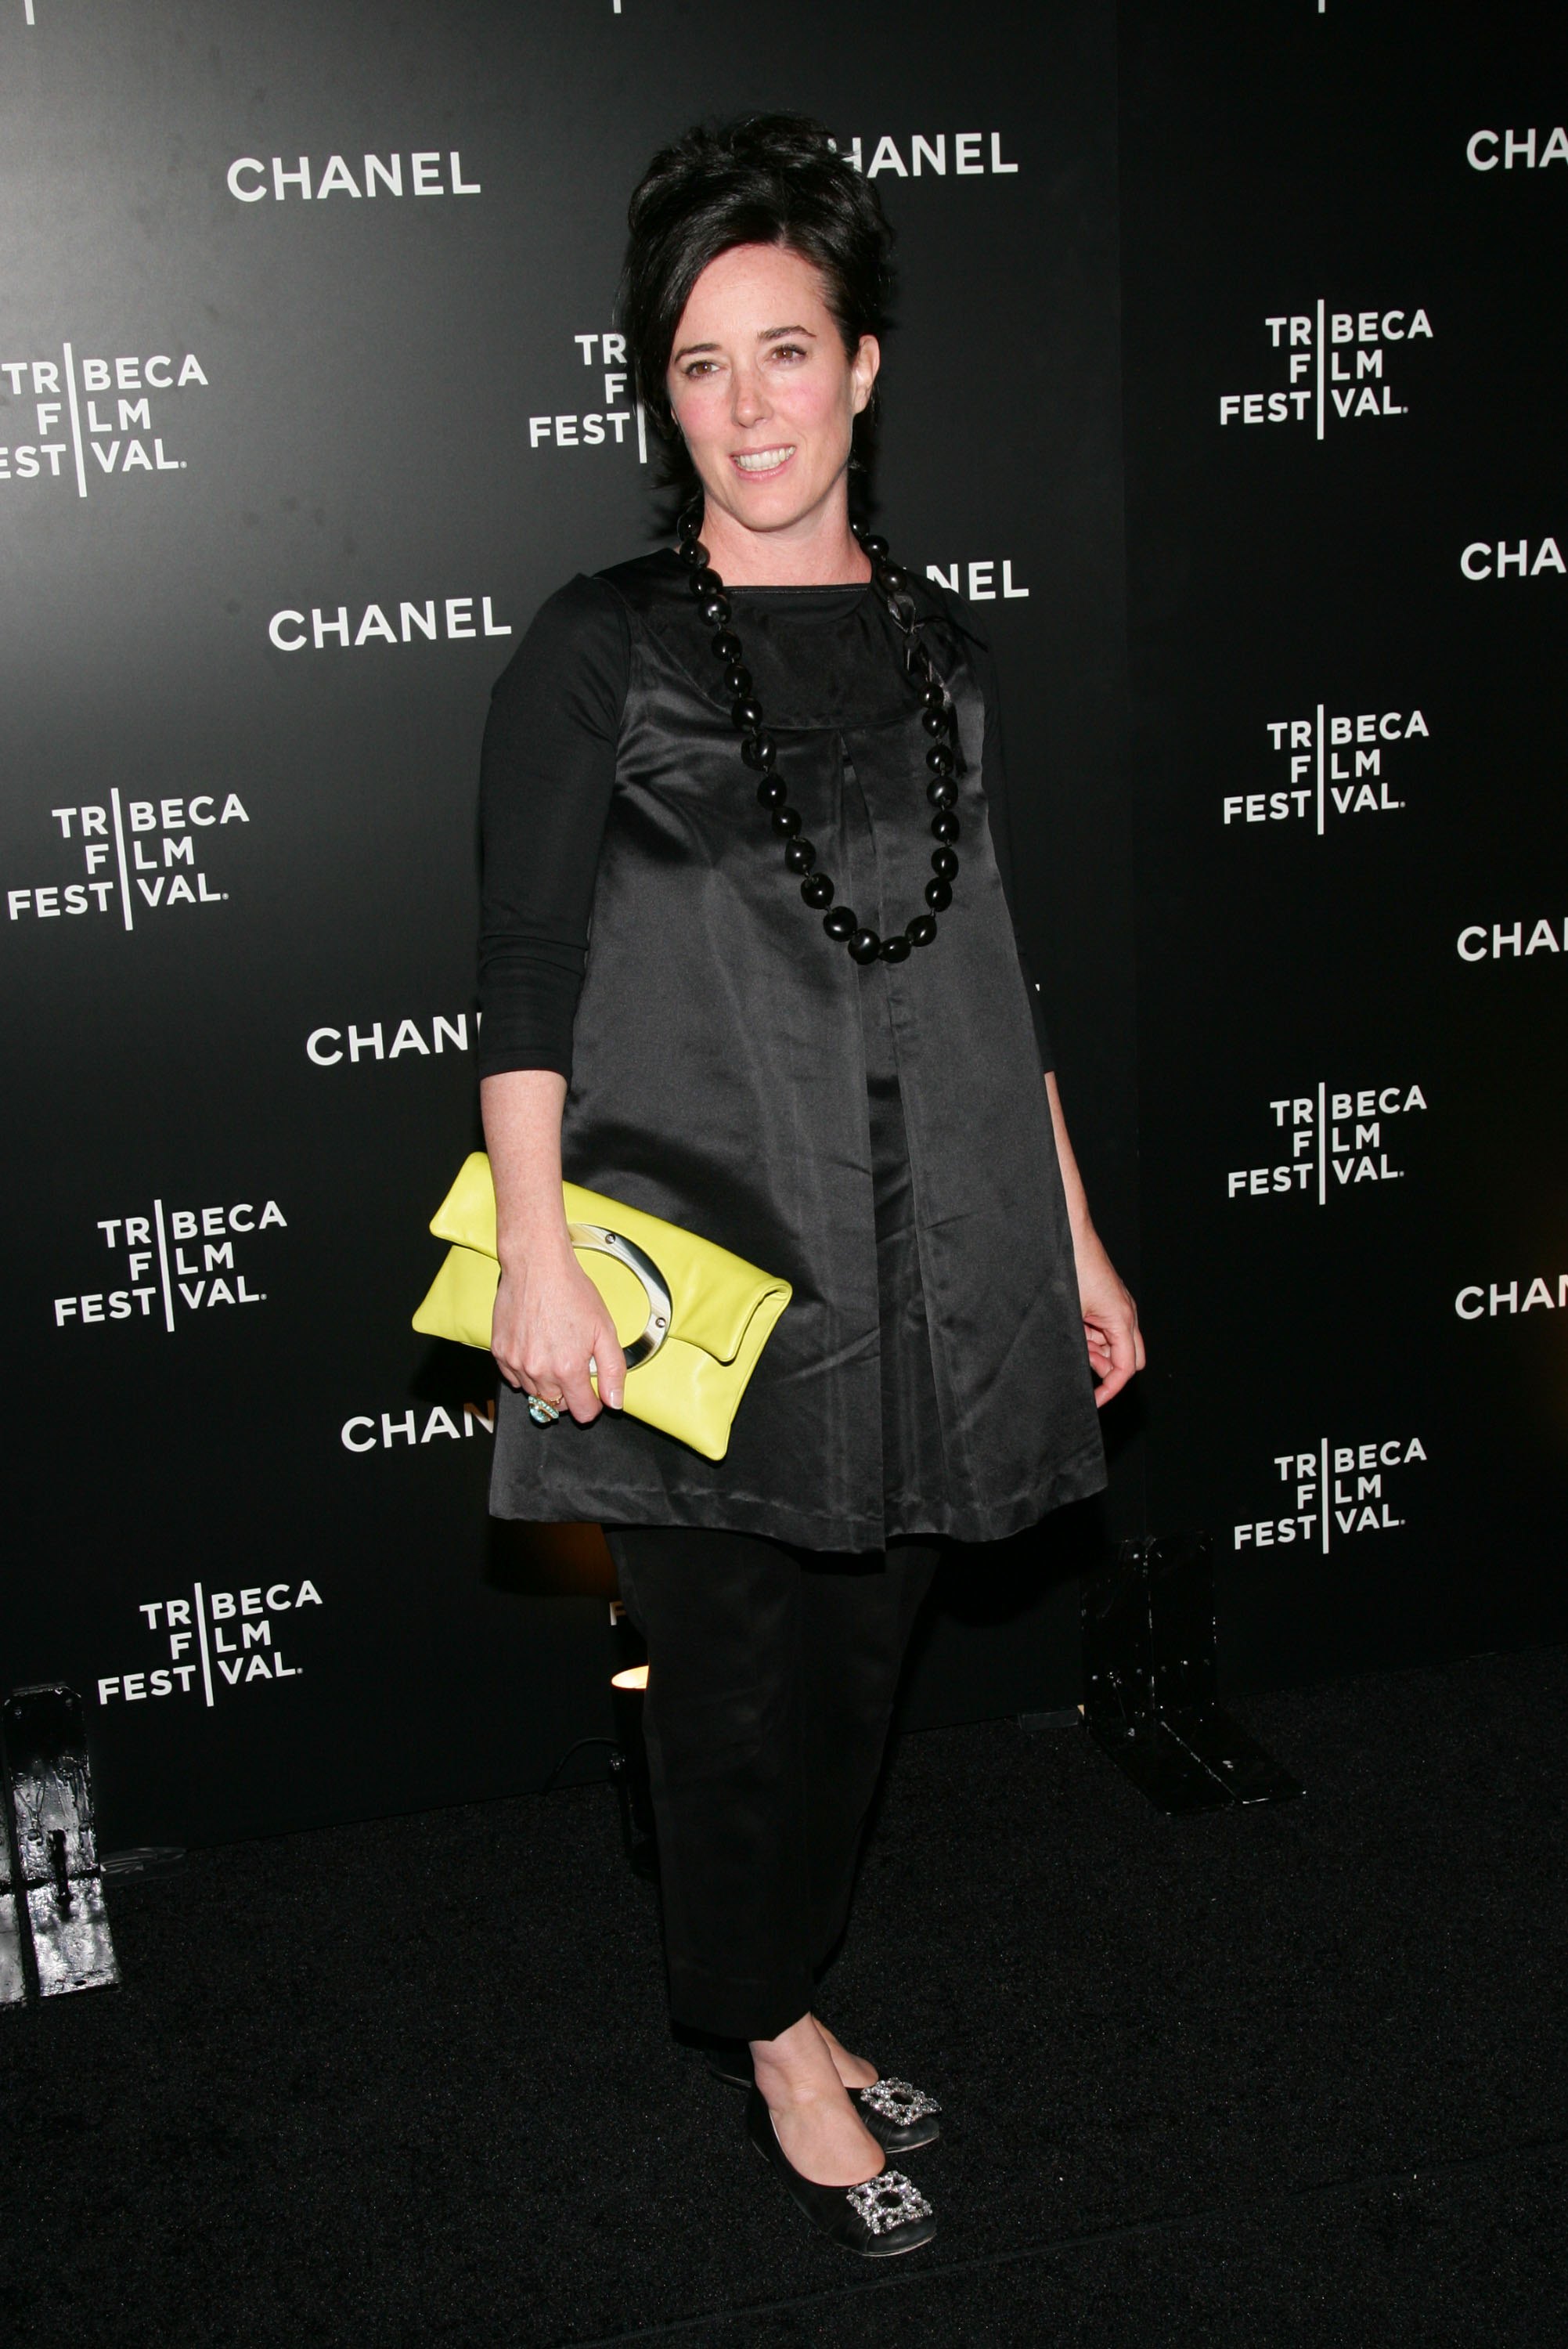 Fashion Designer Kate Spade Found Dead In Apparent Suicide : The